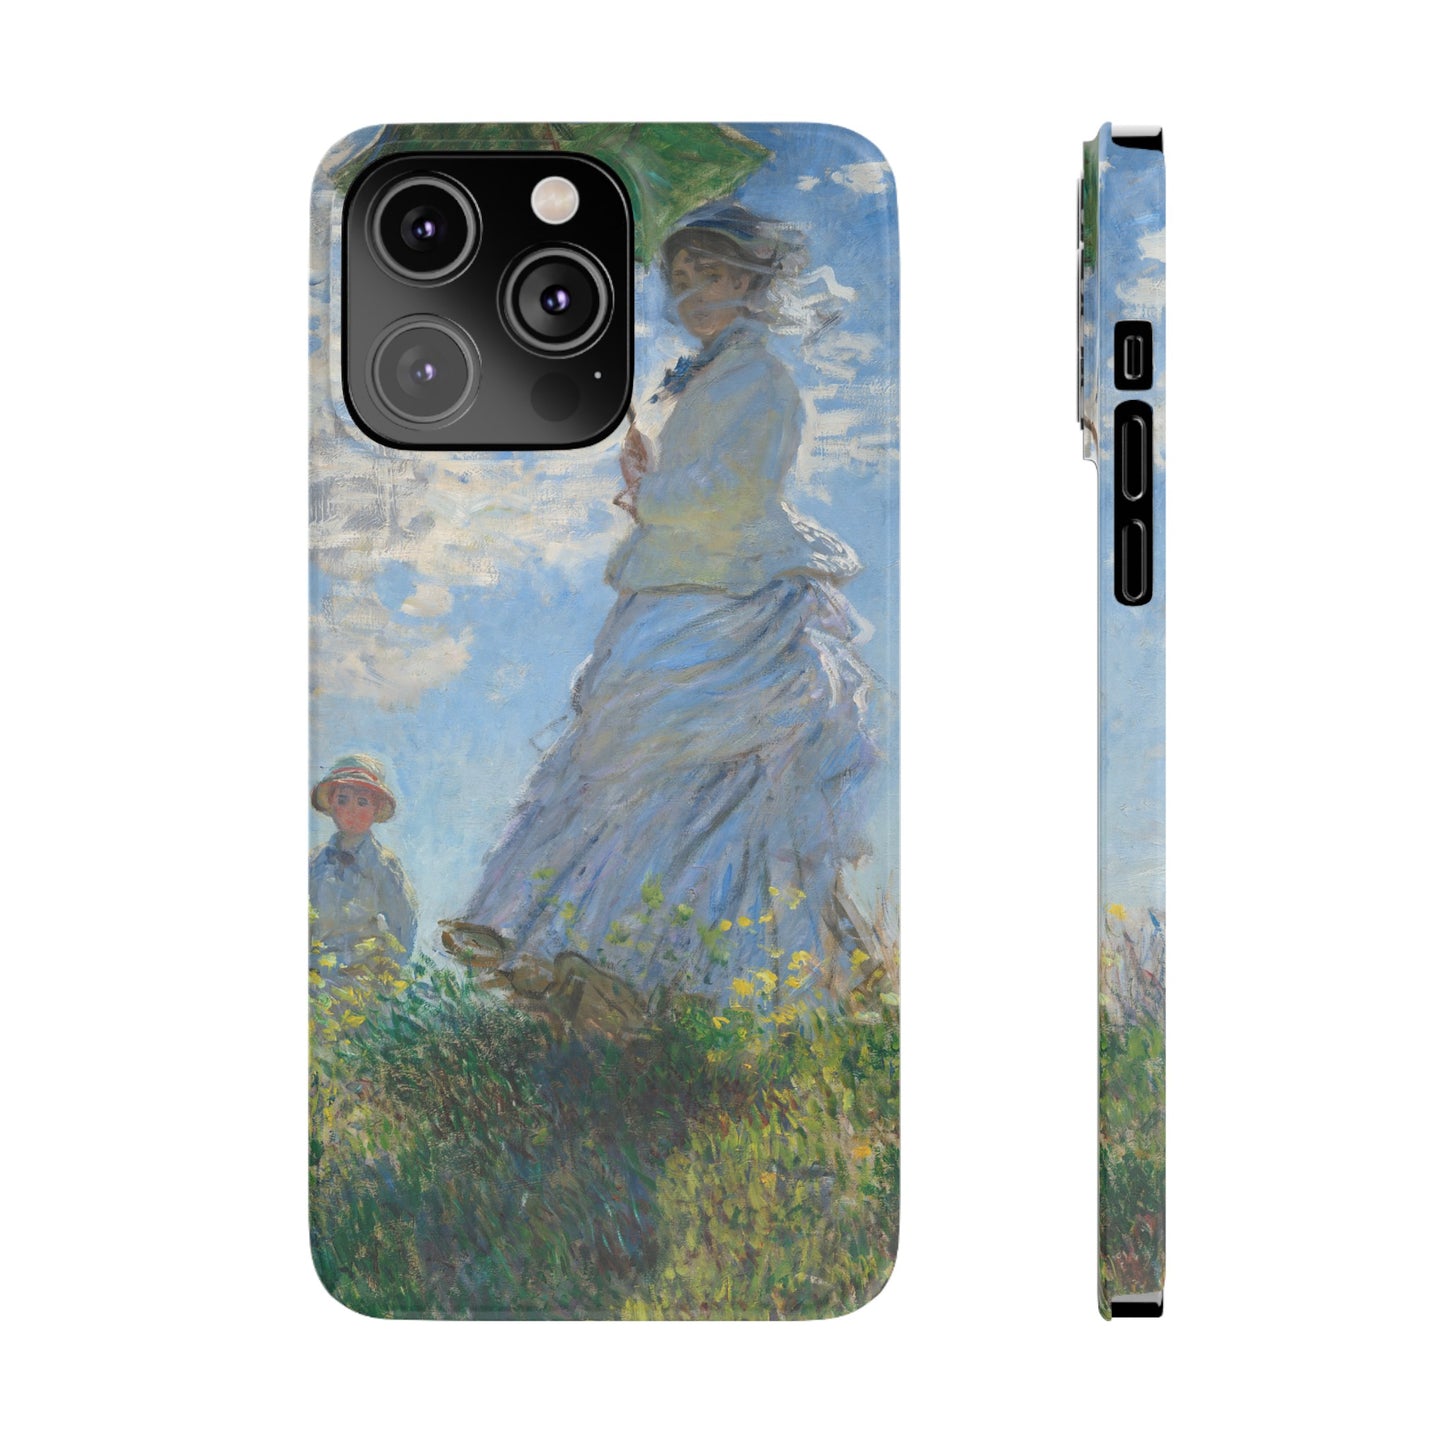 In the fields - Iphone Case